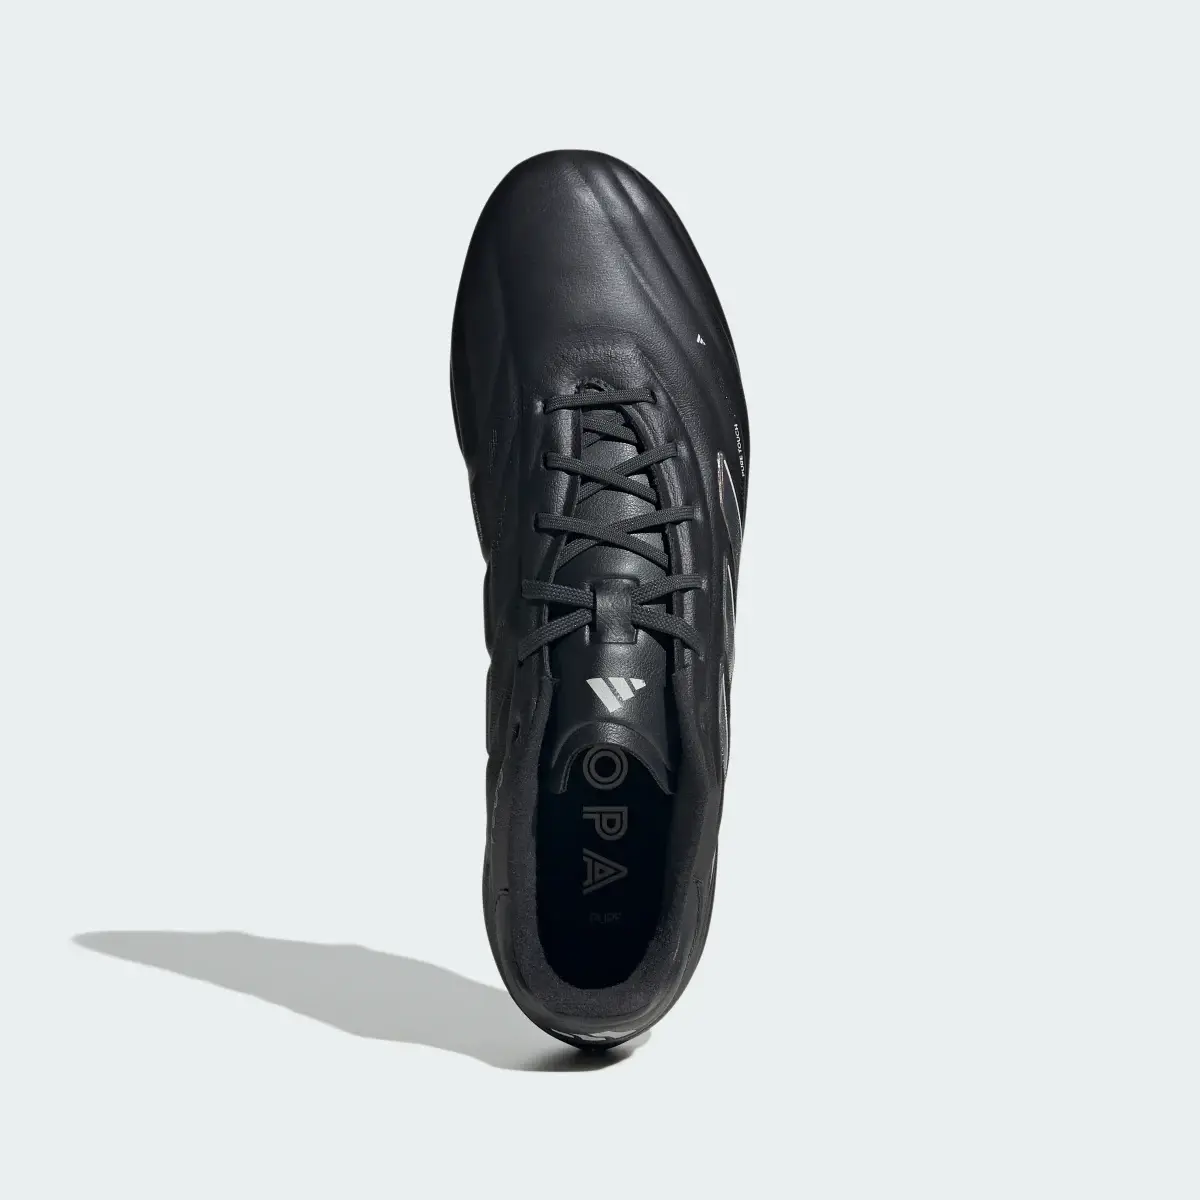 Adidas Copa Pure II Elite Firm Ground Boots. 3